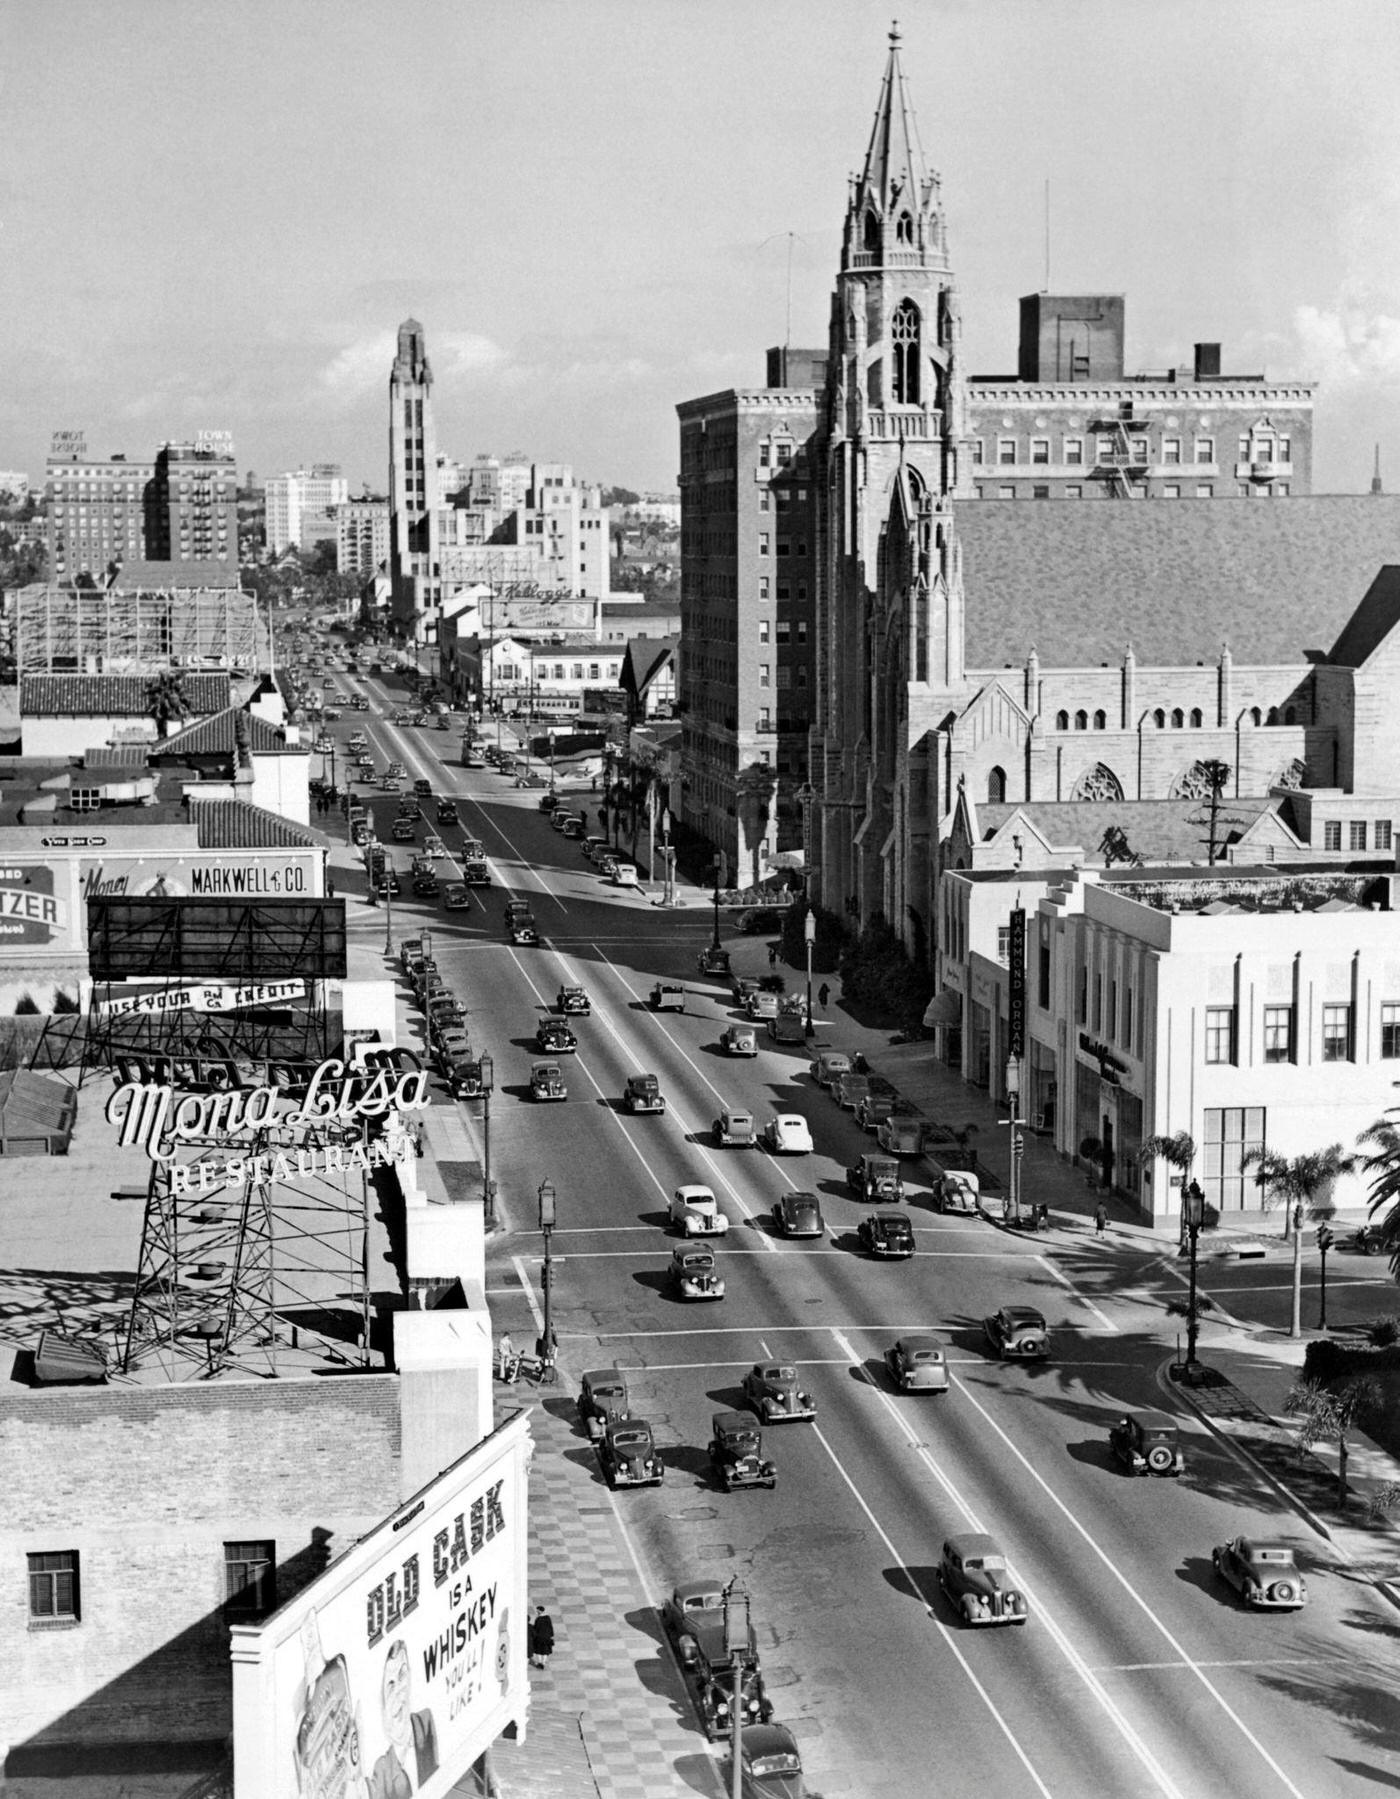 Wilshire Boulevard at Catalina, with the Mona Lisa Restaurant at the left, the Immanuel Presbyterian Church across the street, and Bullock's Wilshire Department Store tower can be seen further west on Wilshire, Los Angeles, 1938.